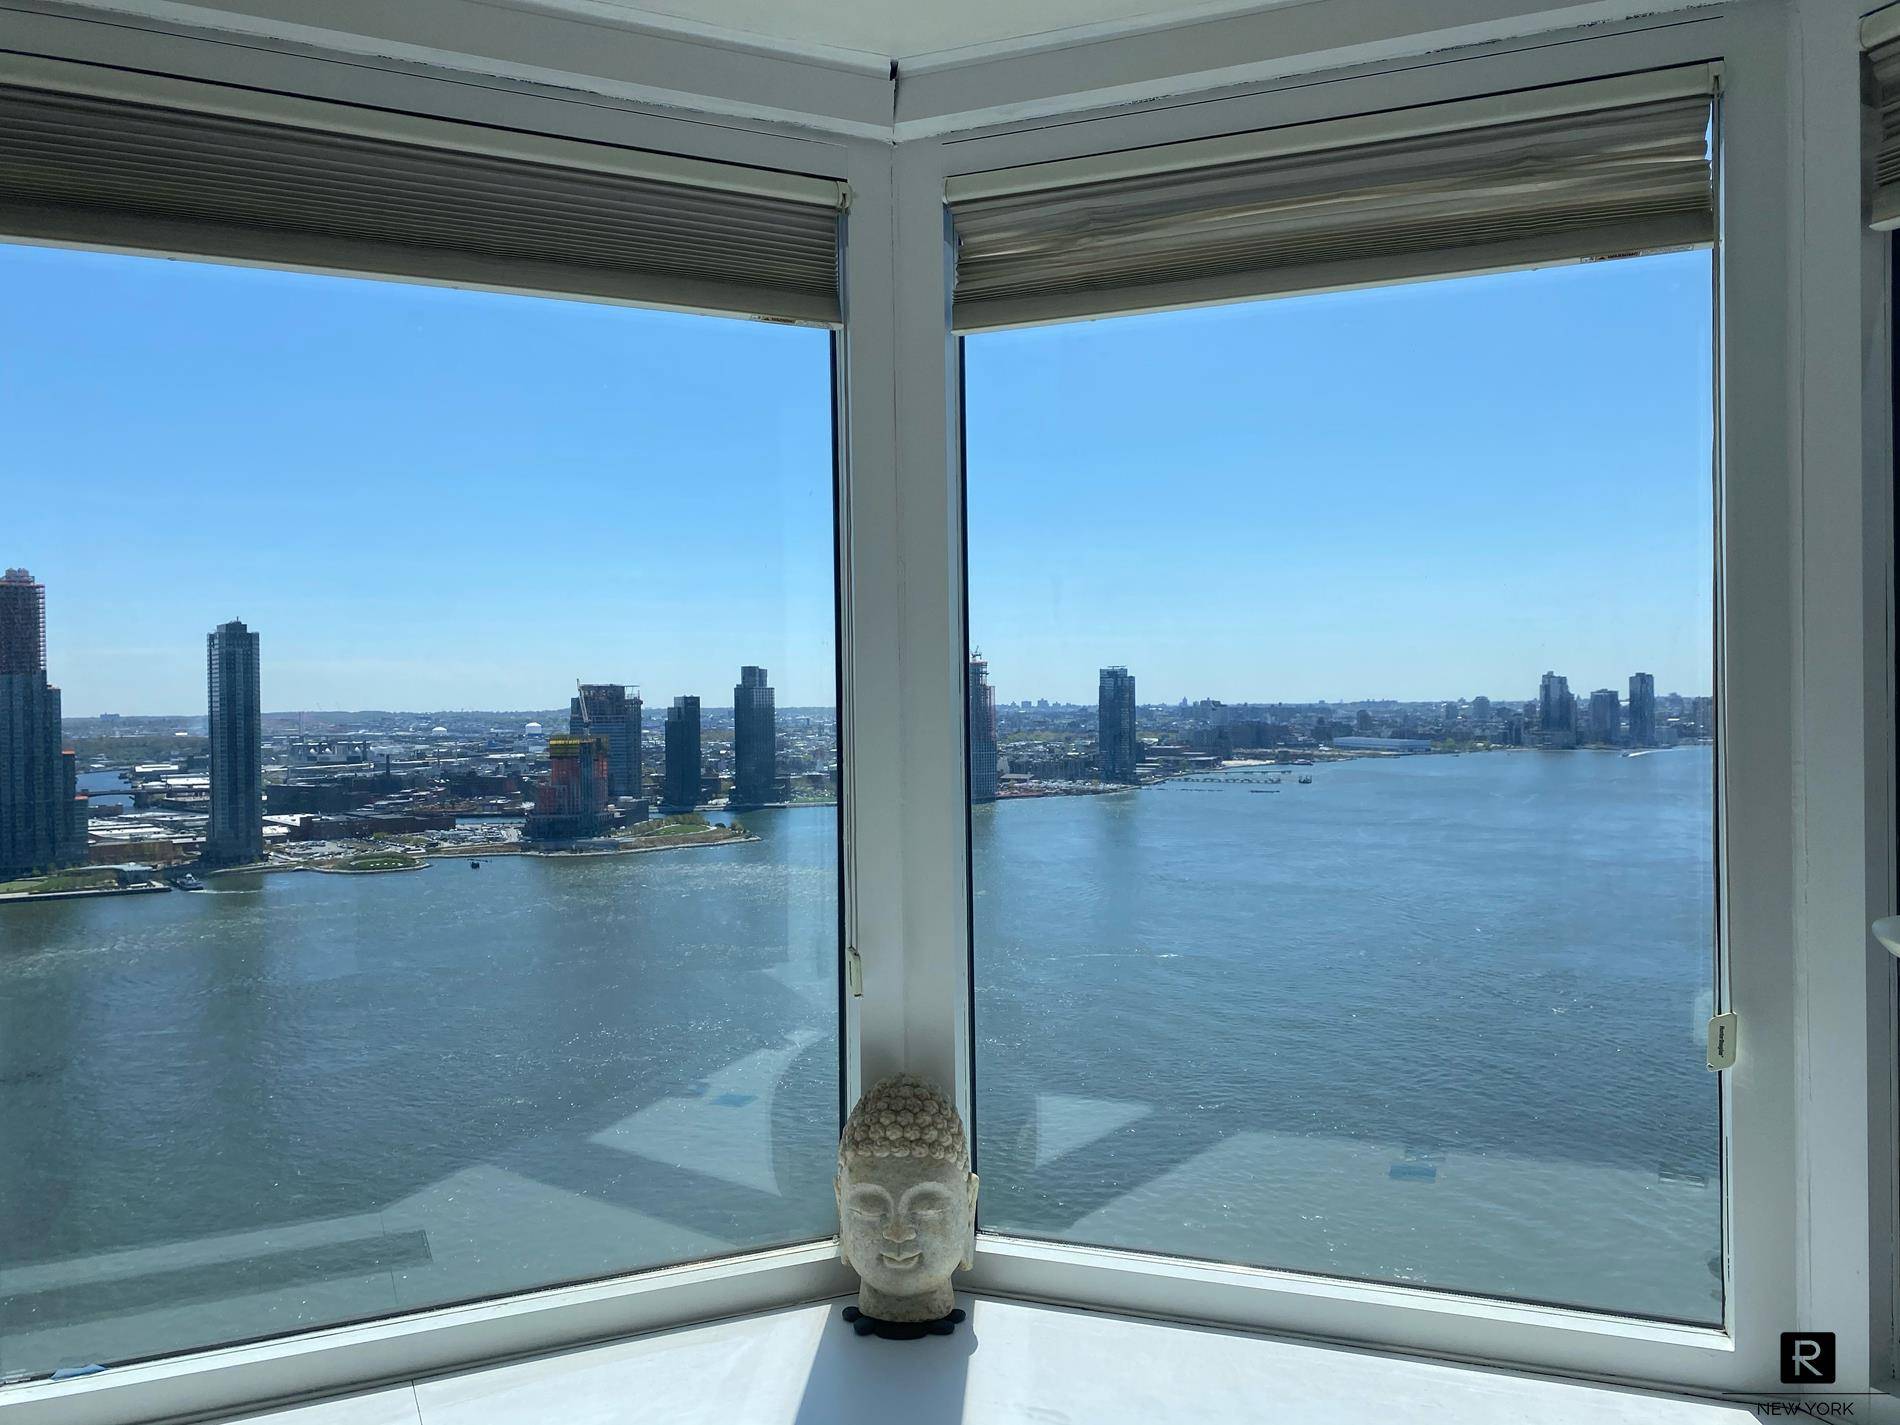 Truly Amazing River and City Views from this fully furnished 2 bedroom 2 bath apartment on the 36th floor of The Horizon, a full service concierge luxury building.